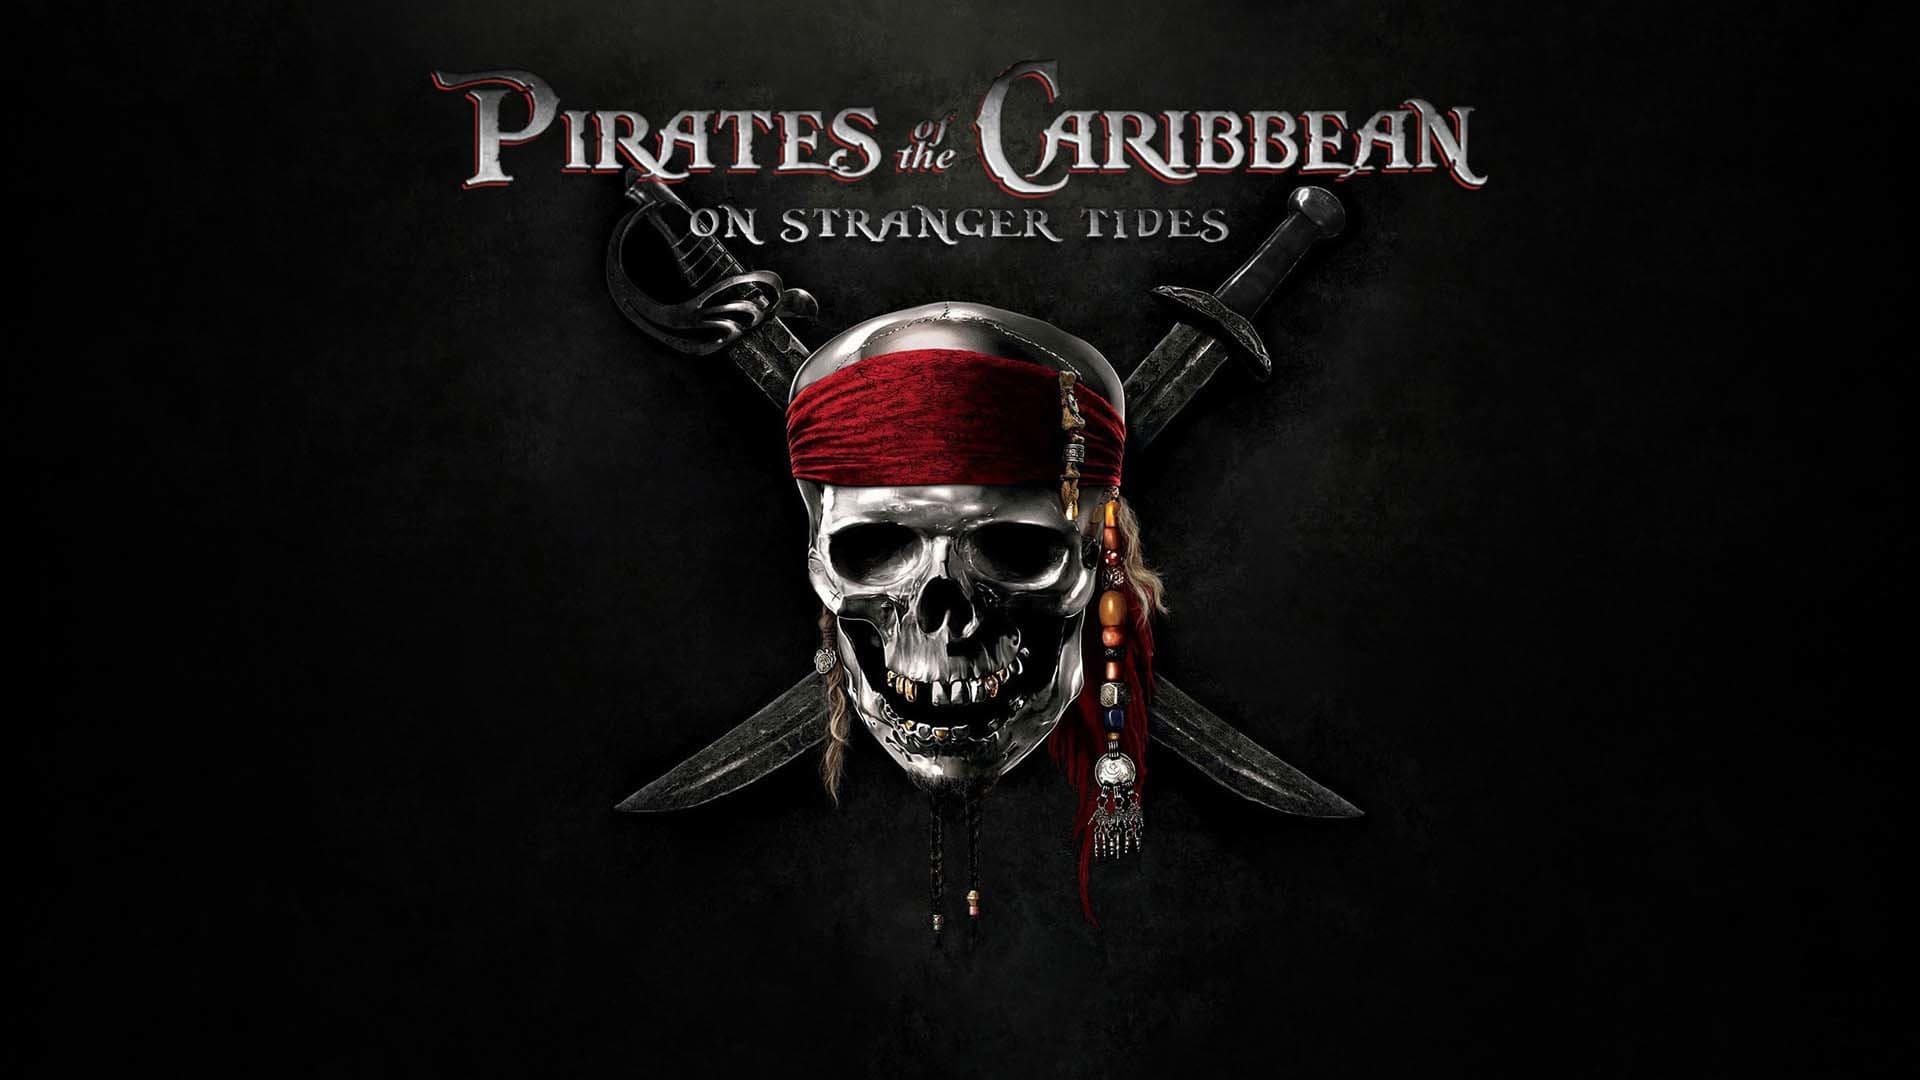 watch pirates of the caribbean 2 online free megavideo